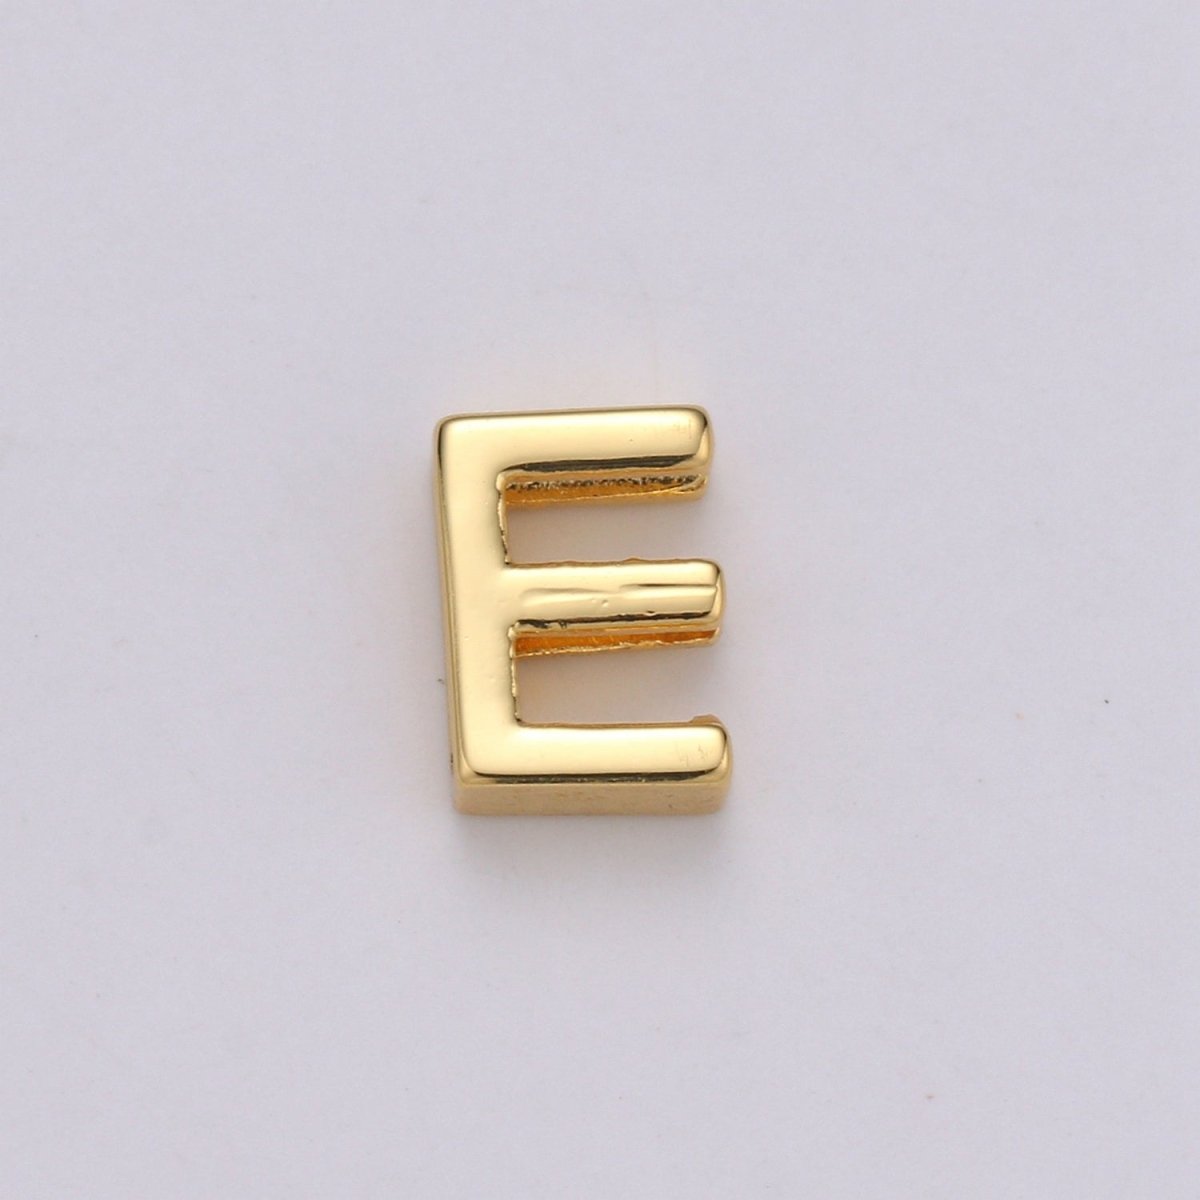 Slider Initial Charm 14k Gold Filled Letter Charm 6.5x7.8mm Slide Bracelet Necklace Jewelry Making Supply Personalize Jewelry Minimalist A-157 to A-169 - DLUXCA